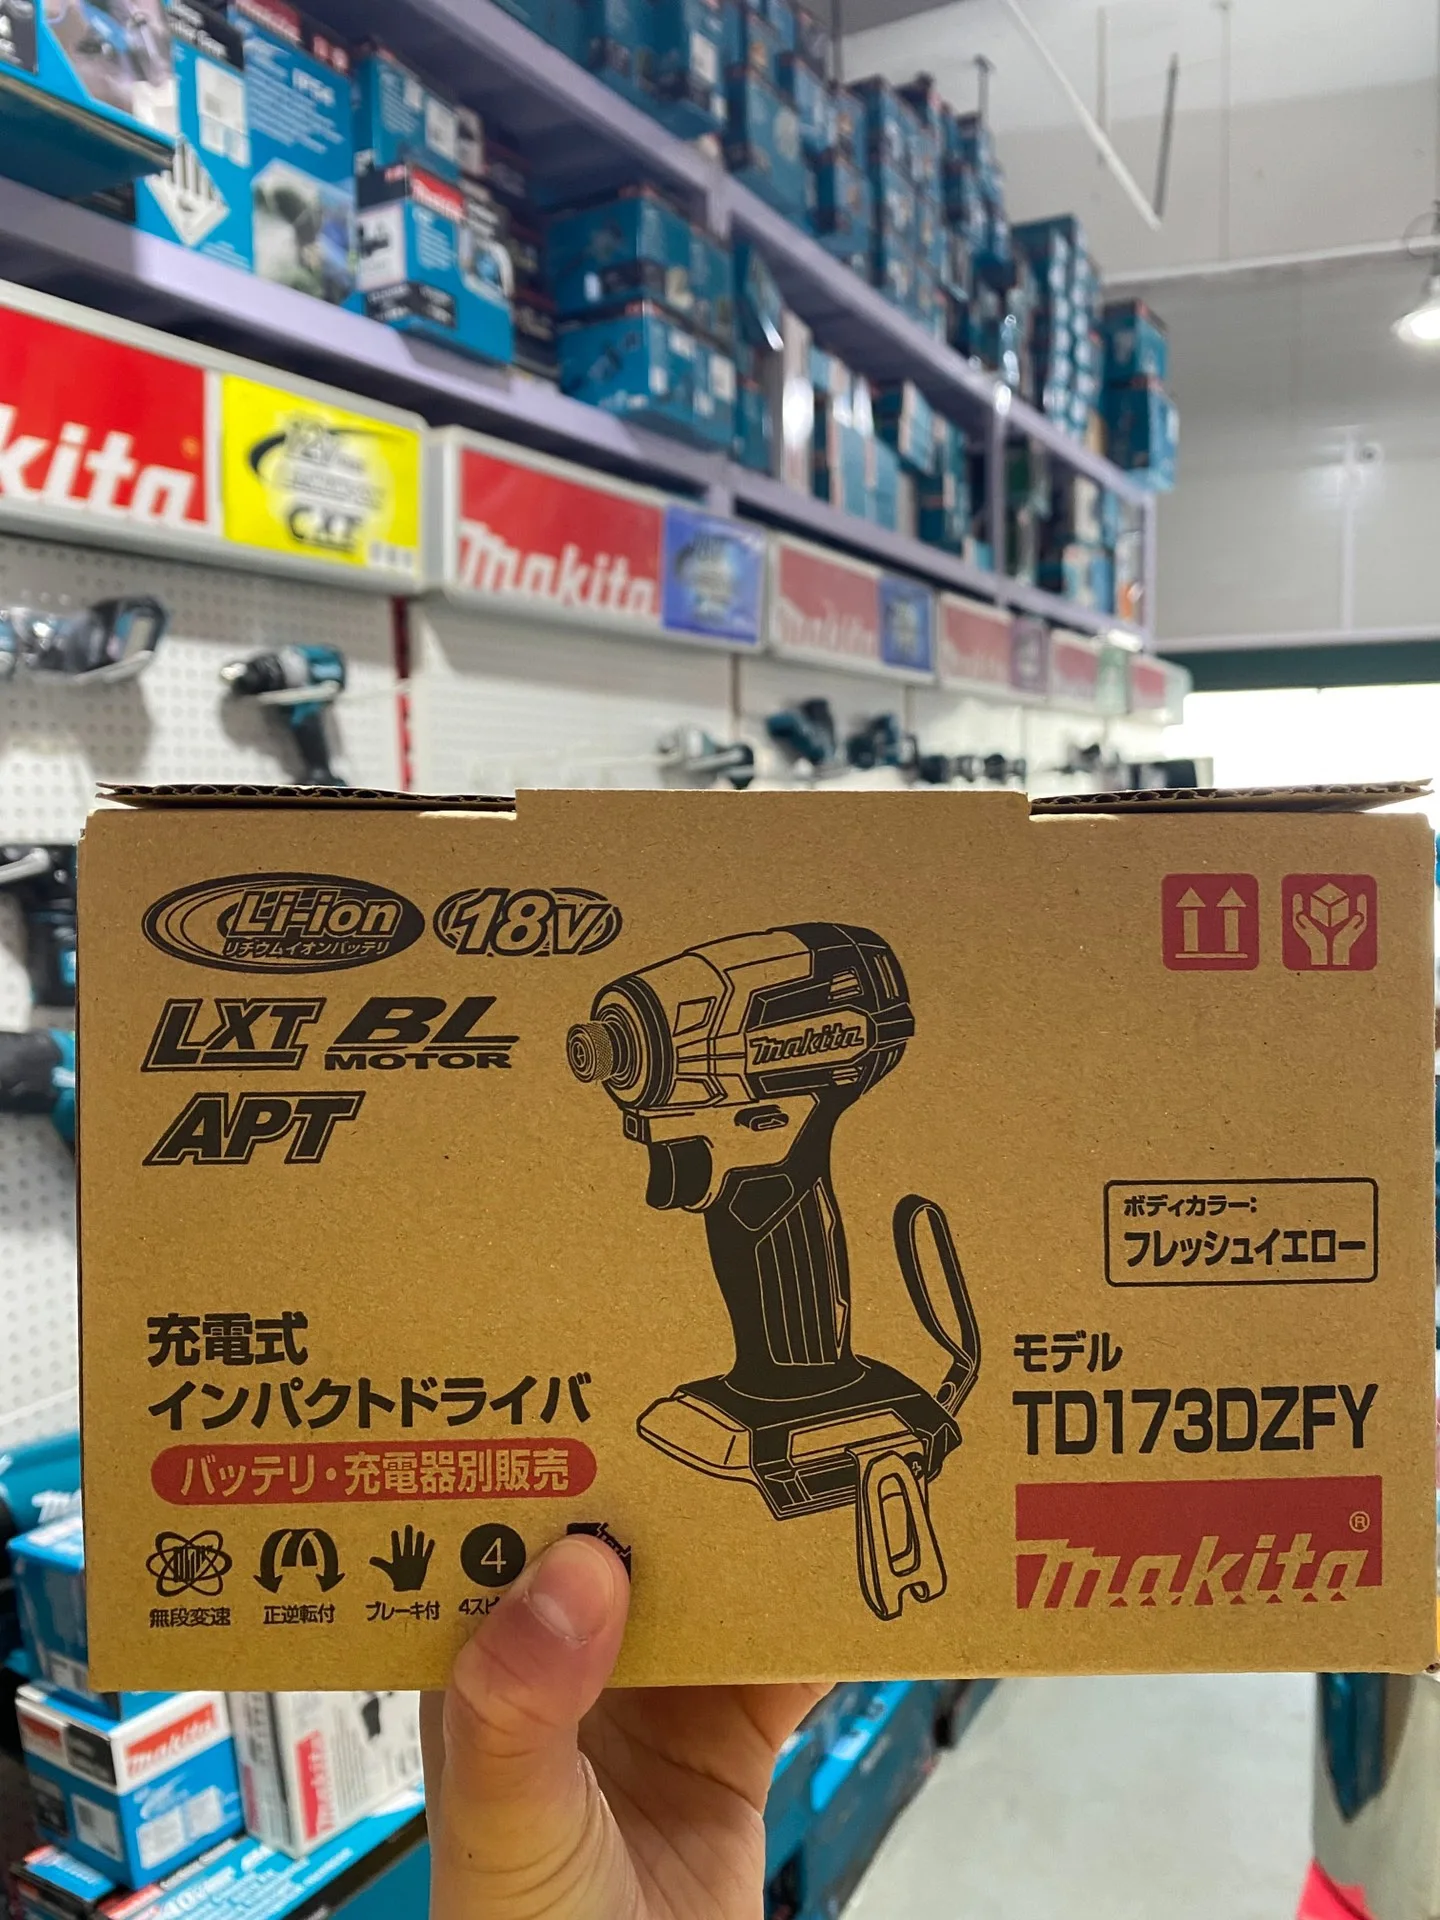 Makita DTD173 Japan  Version Brushless 18v Lithium Impact Driver Power Tool Multi-function Tool  Original and authentic products makita dtd173 18v lithium japan imported domestic version brushless impact driver power tool multi function tool